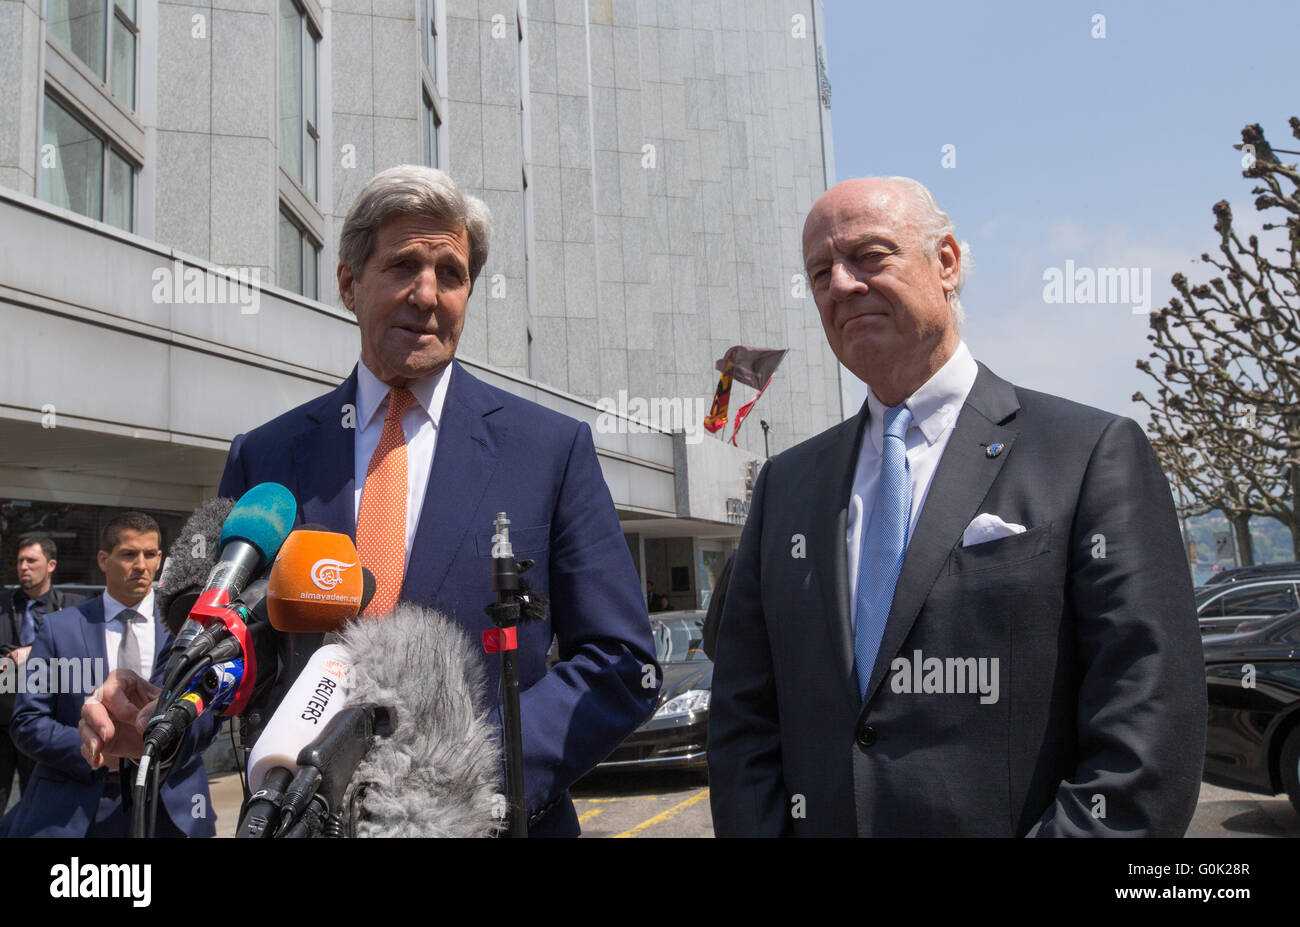 Geneva, Switzerland. 2nd May, 2016. U.S. Secretary of State John Kerry (L) and UN Special Envoy for Syria Staffan de Mistura hold a press conference after their meeting in a hotel in Geneva, Switzerland, May 2, 2016. U.S. Secretary of State John Kerry on Monday urged all parties to the Syrian conflict to end violence and restore the cessation of hostilities during his second day trip here for talks focusing on the Syrian situation. Credit:  Xu Jinquan/Xinhua/Alamy Live News Stock Photo